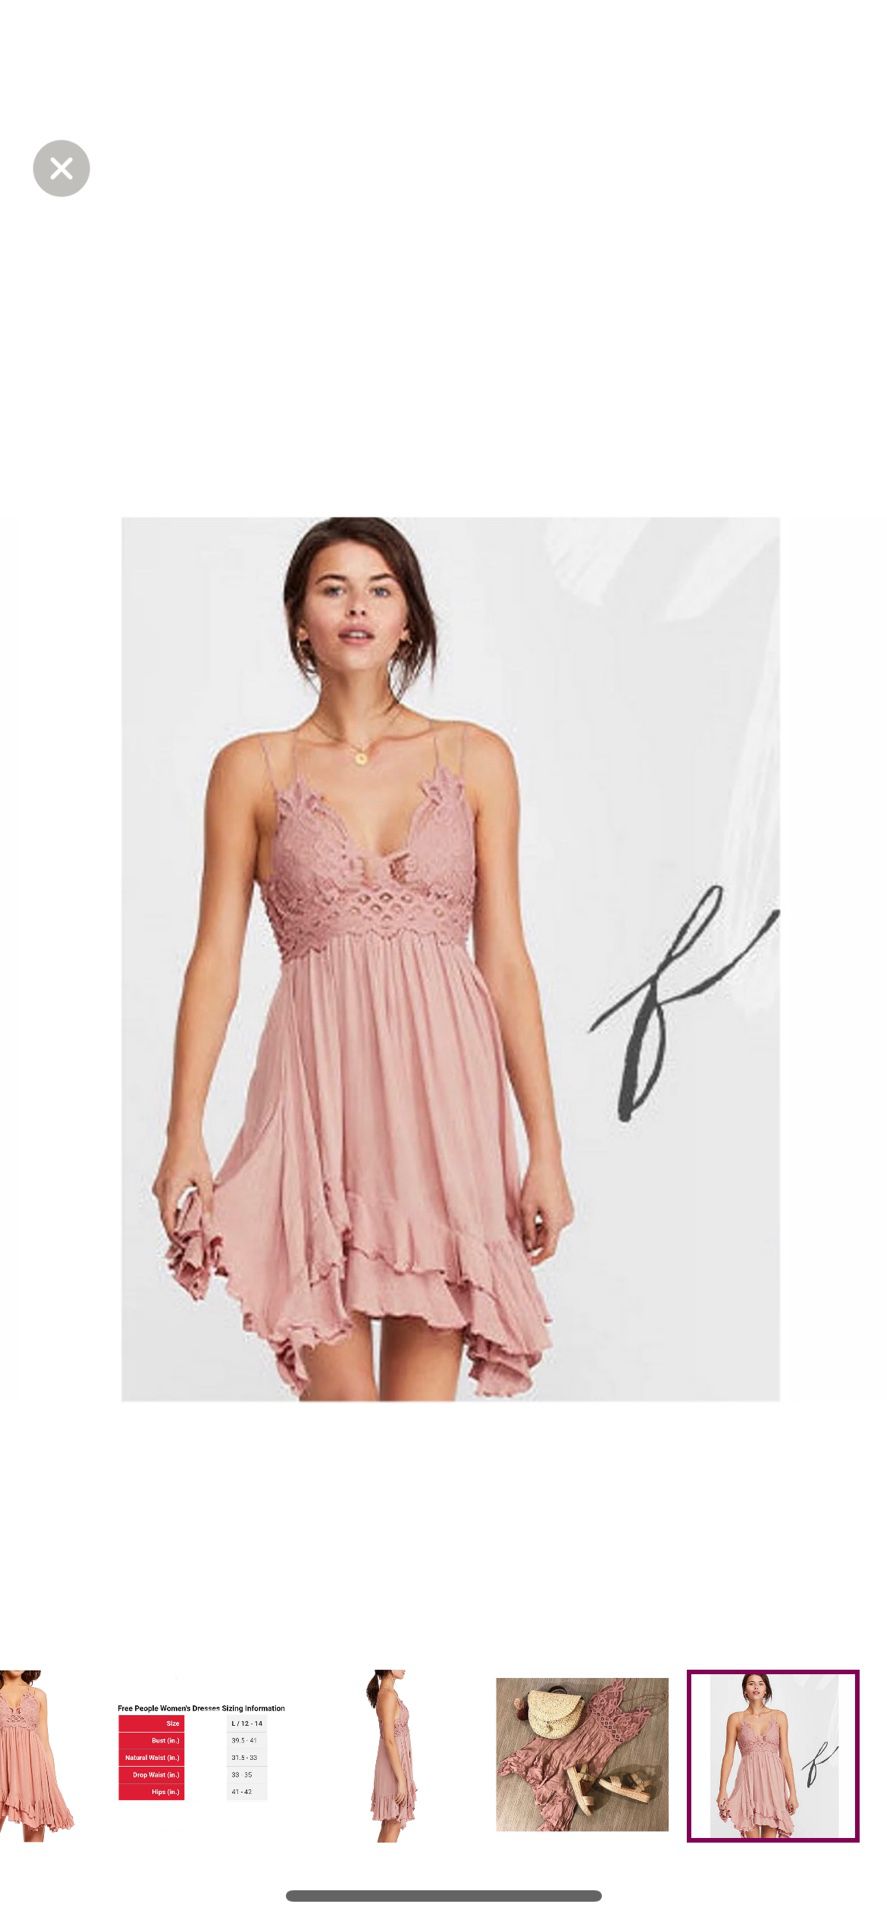 New with tag Free People Adella Slip Dress Mini Lace Ruffle Size S. Rose color 